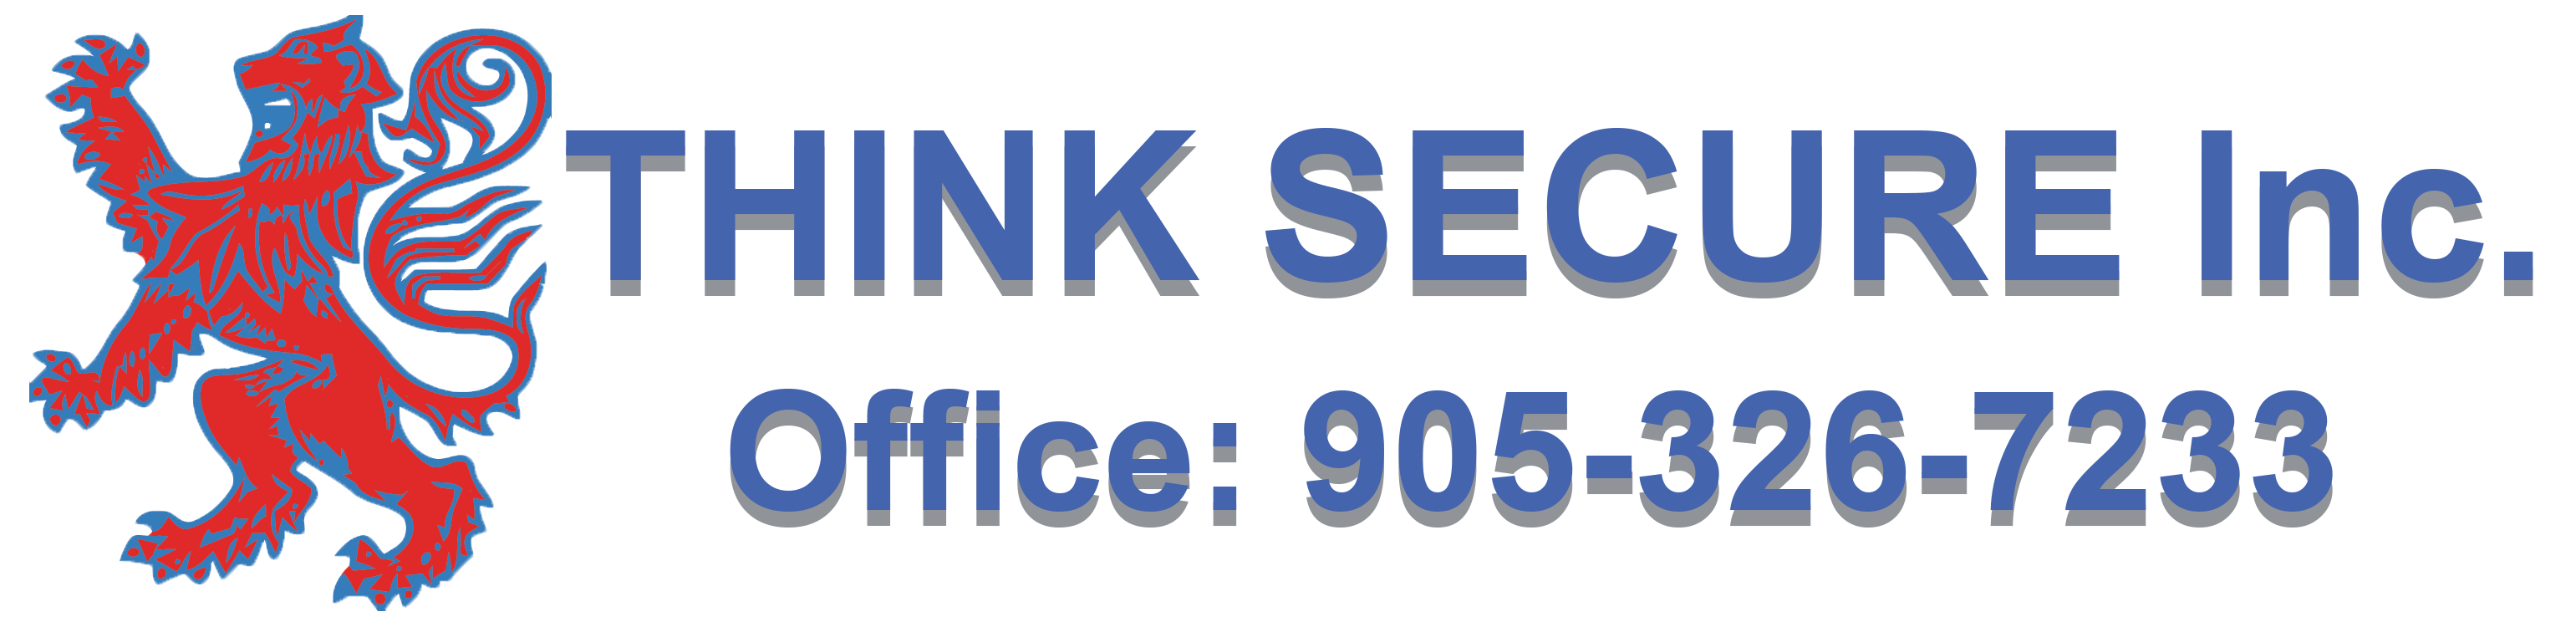 Think Secure Inc.